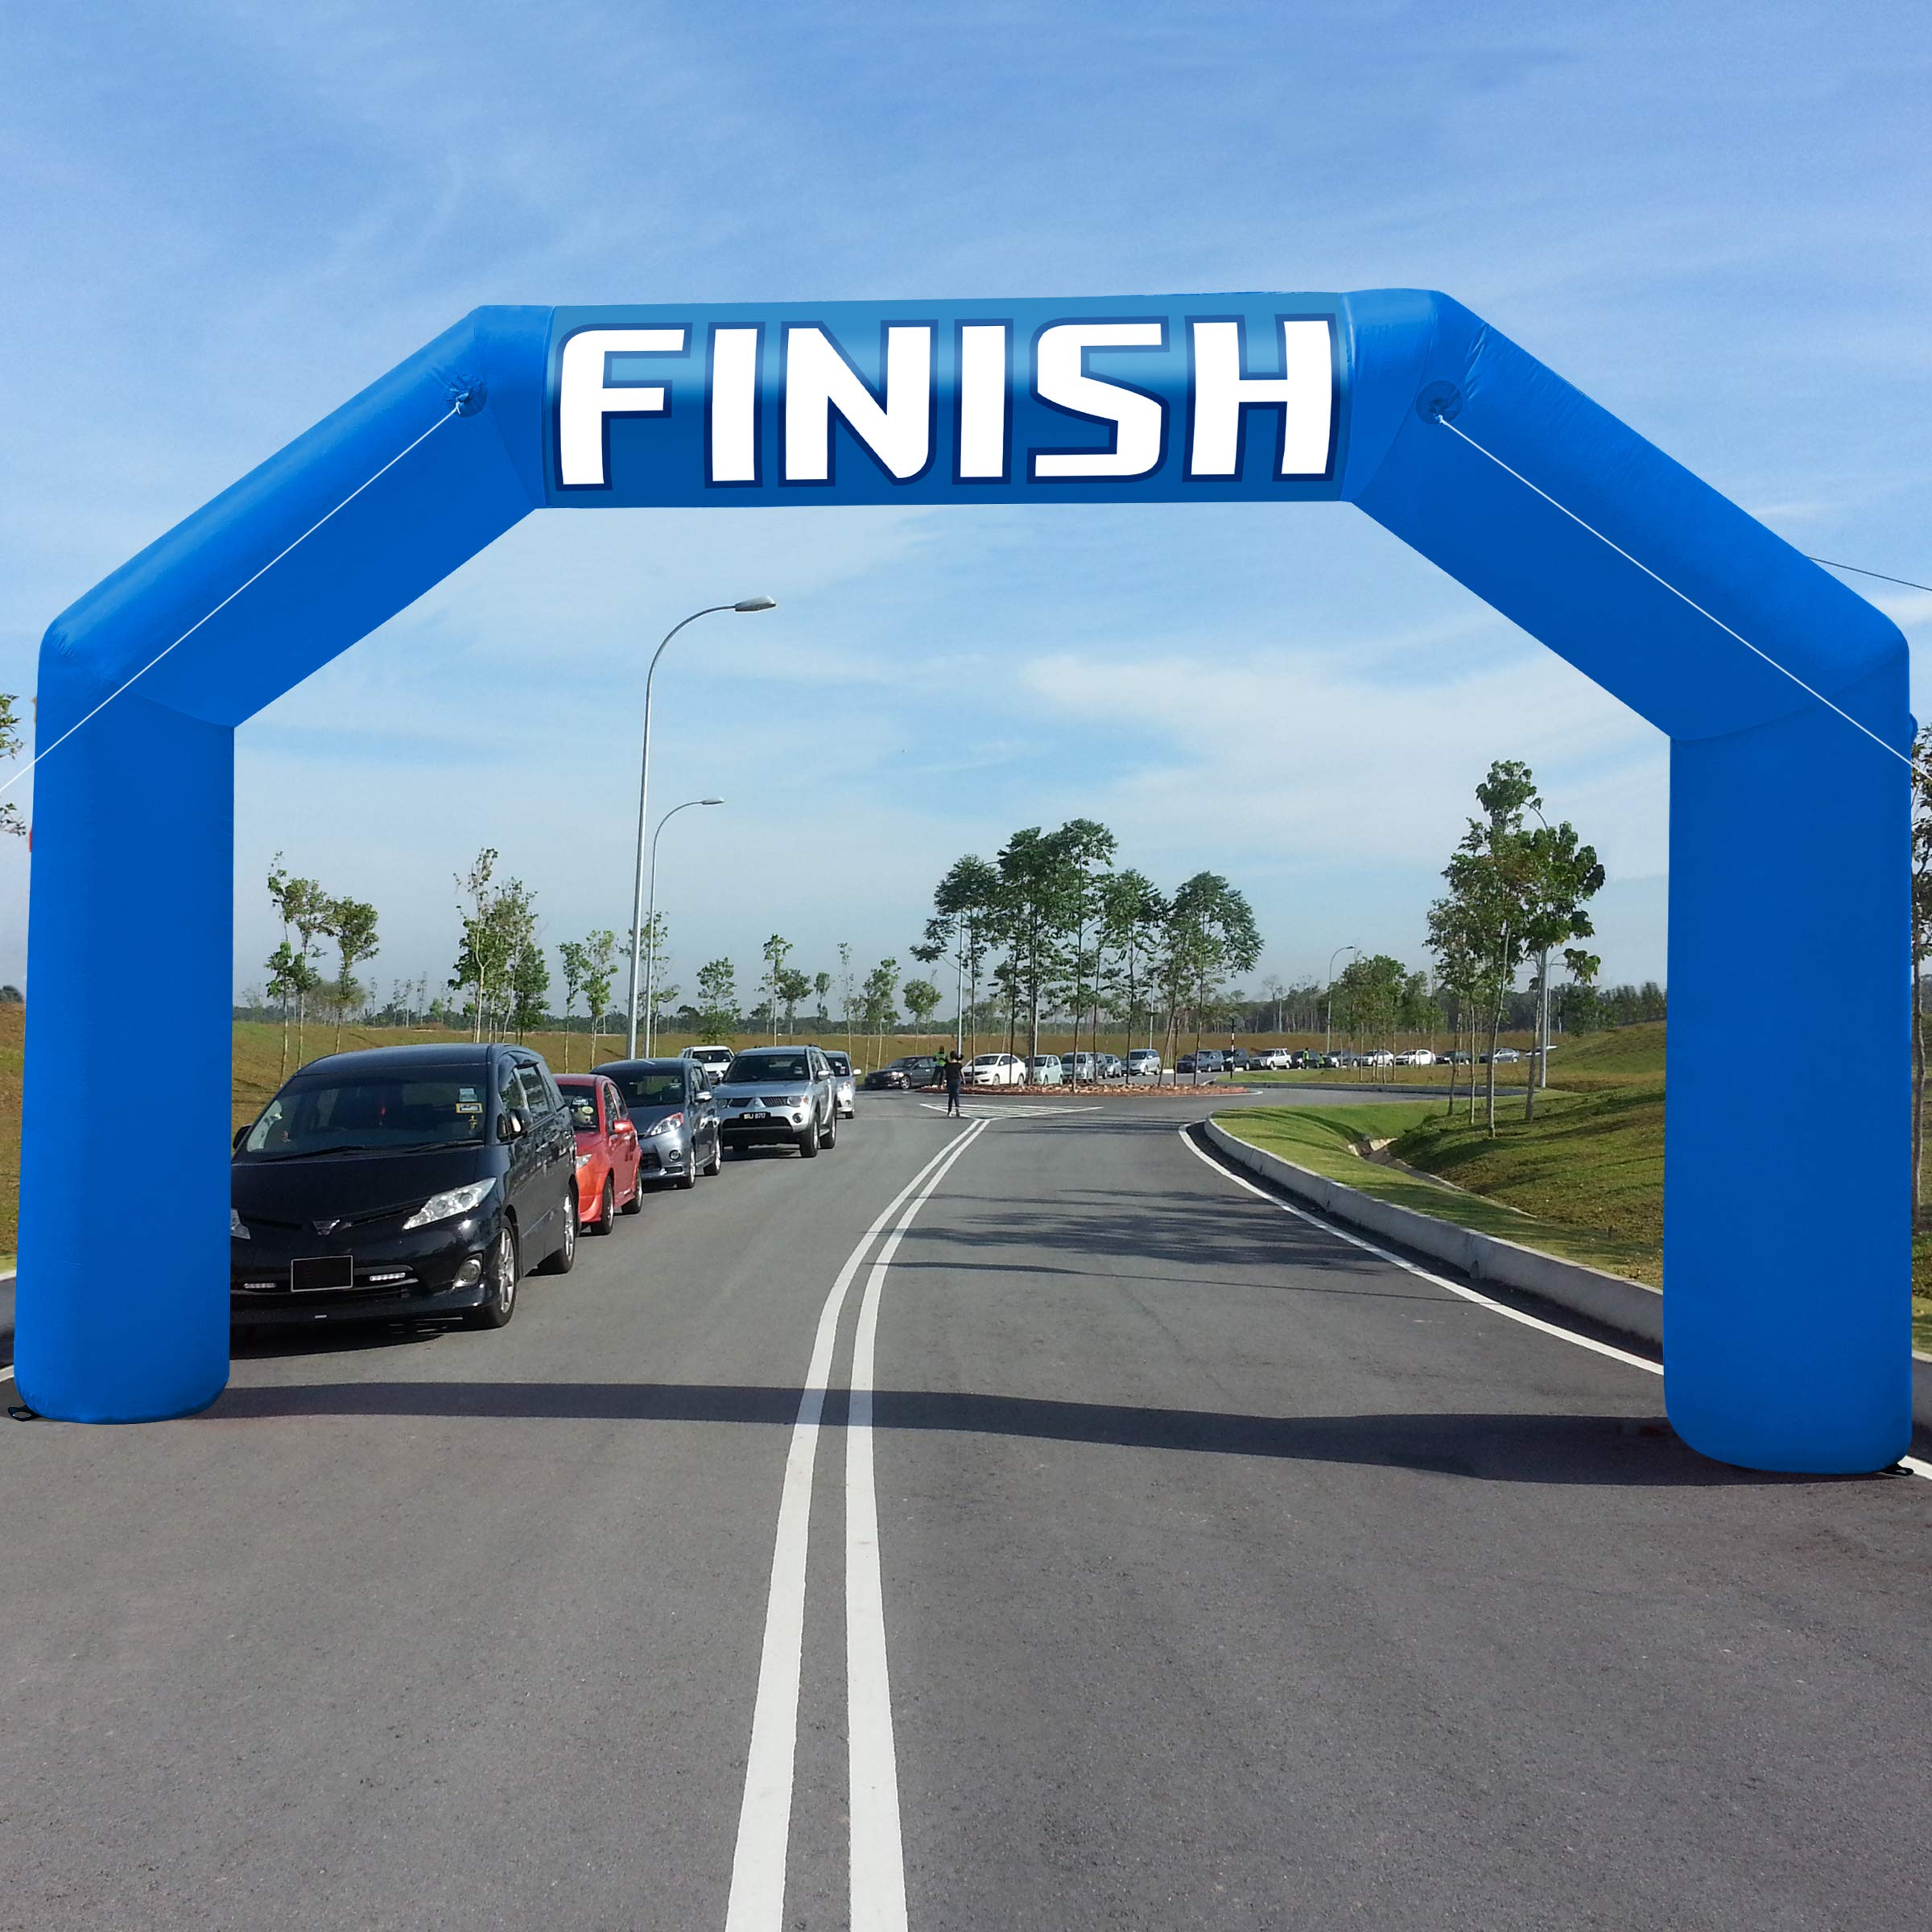 Sewinfla 20ft Inflatable Arch with Start Finish Line Racing Arch Banners & Blower Outdoor Inflatable Archway for Advertising Commerce Party Sport Race